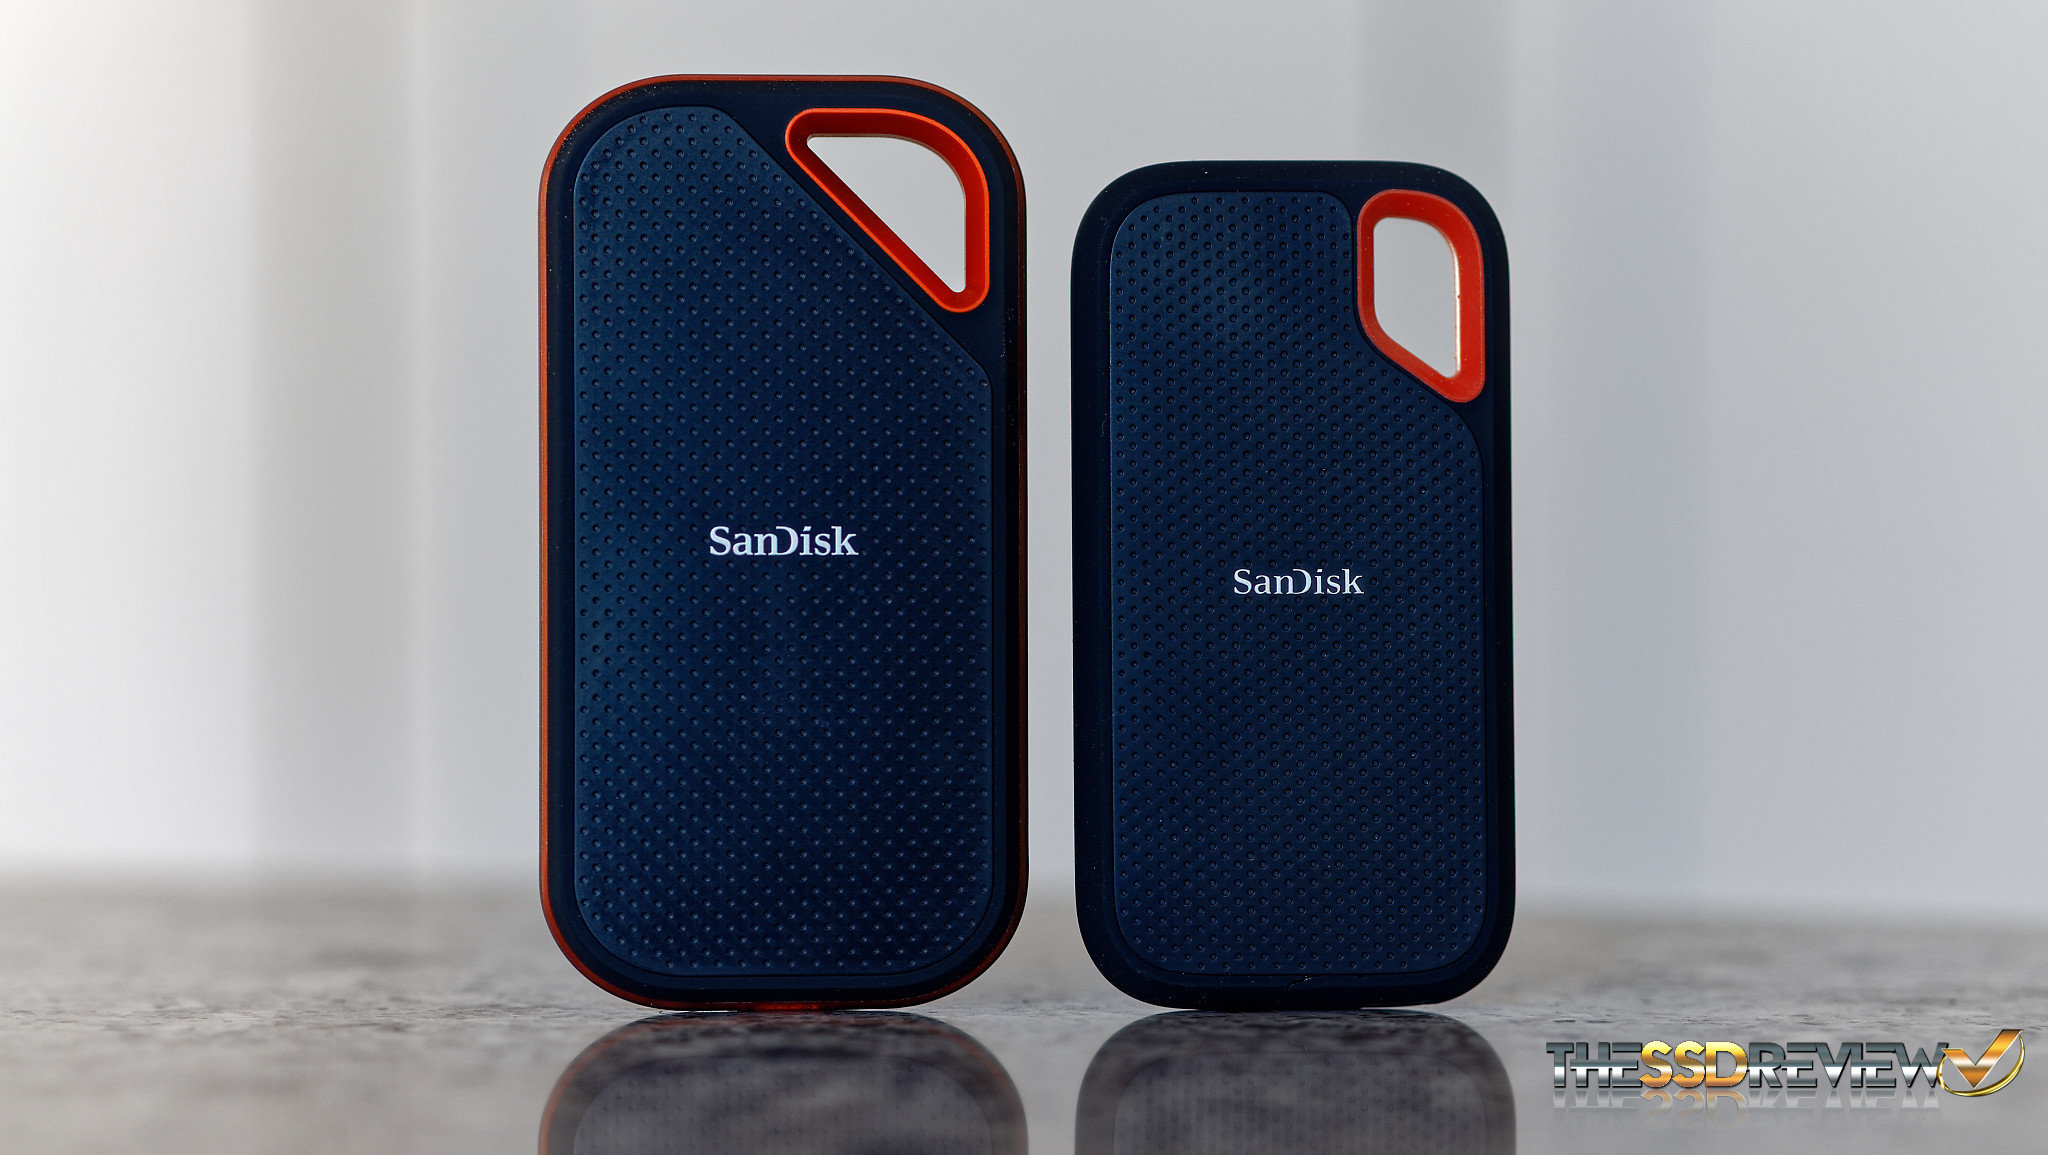 SanDisk Pro V2 Portable SSD Review - The 3 Alternative | The SSD Review